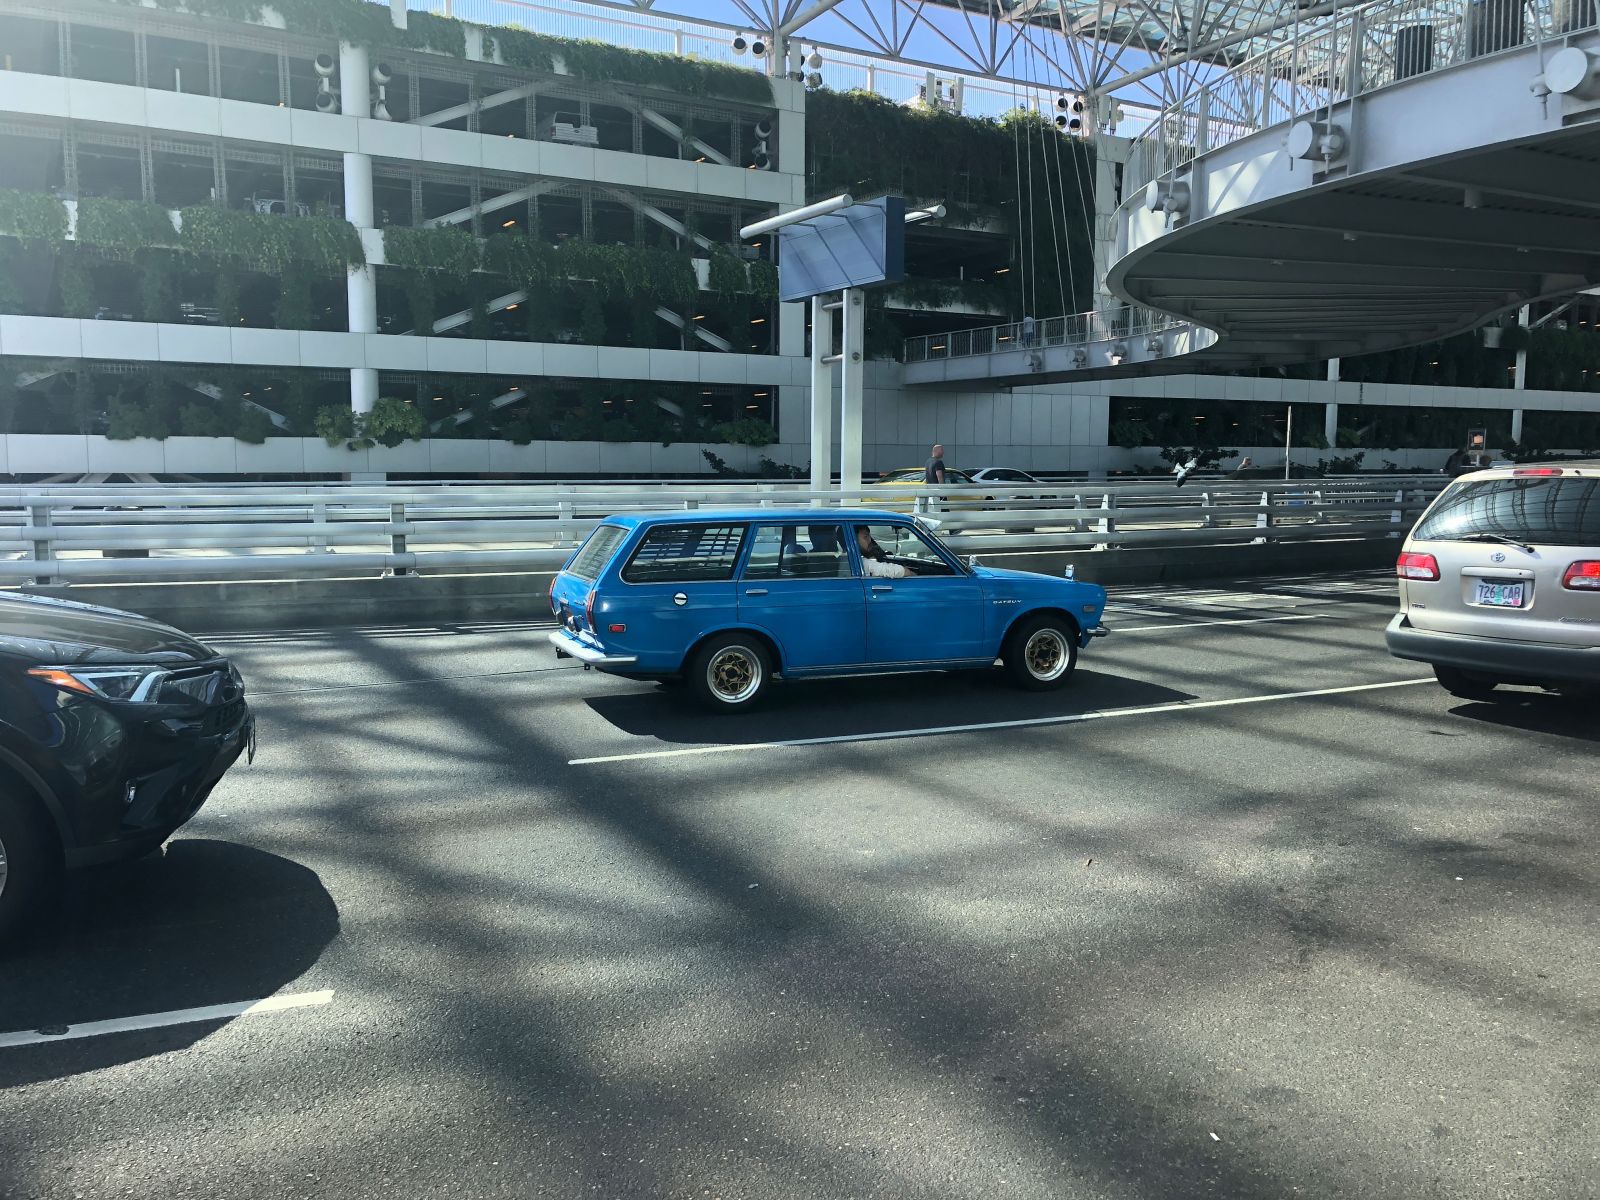 Before my ride even turned up at the airport, this awesome Datsun 510 Wagon came by.